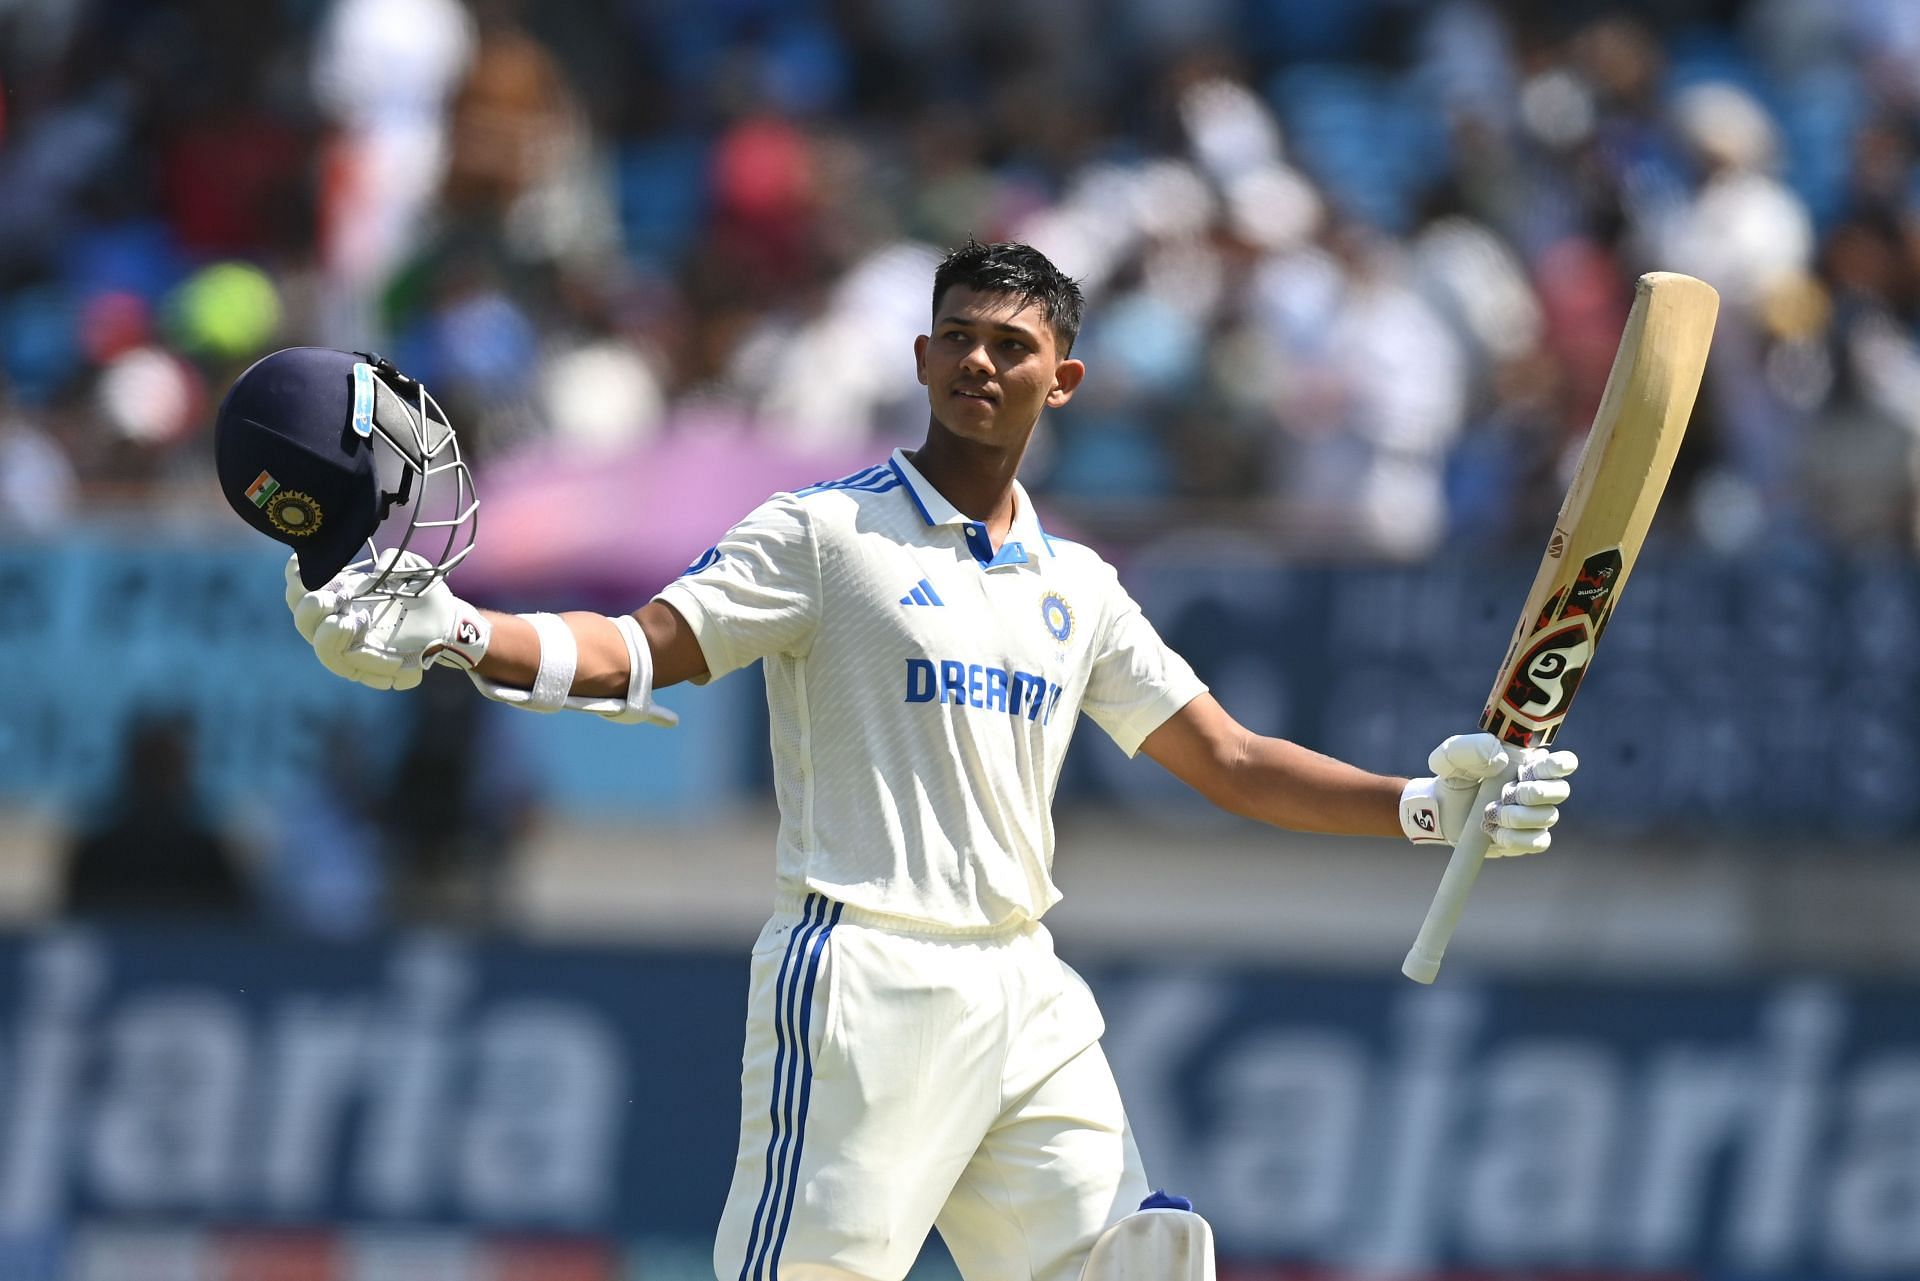 Yashasvi Jaiswal has amassed 861 runs at an average of 71.75 in seven Tests. [P/C: Getty]